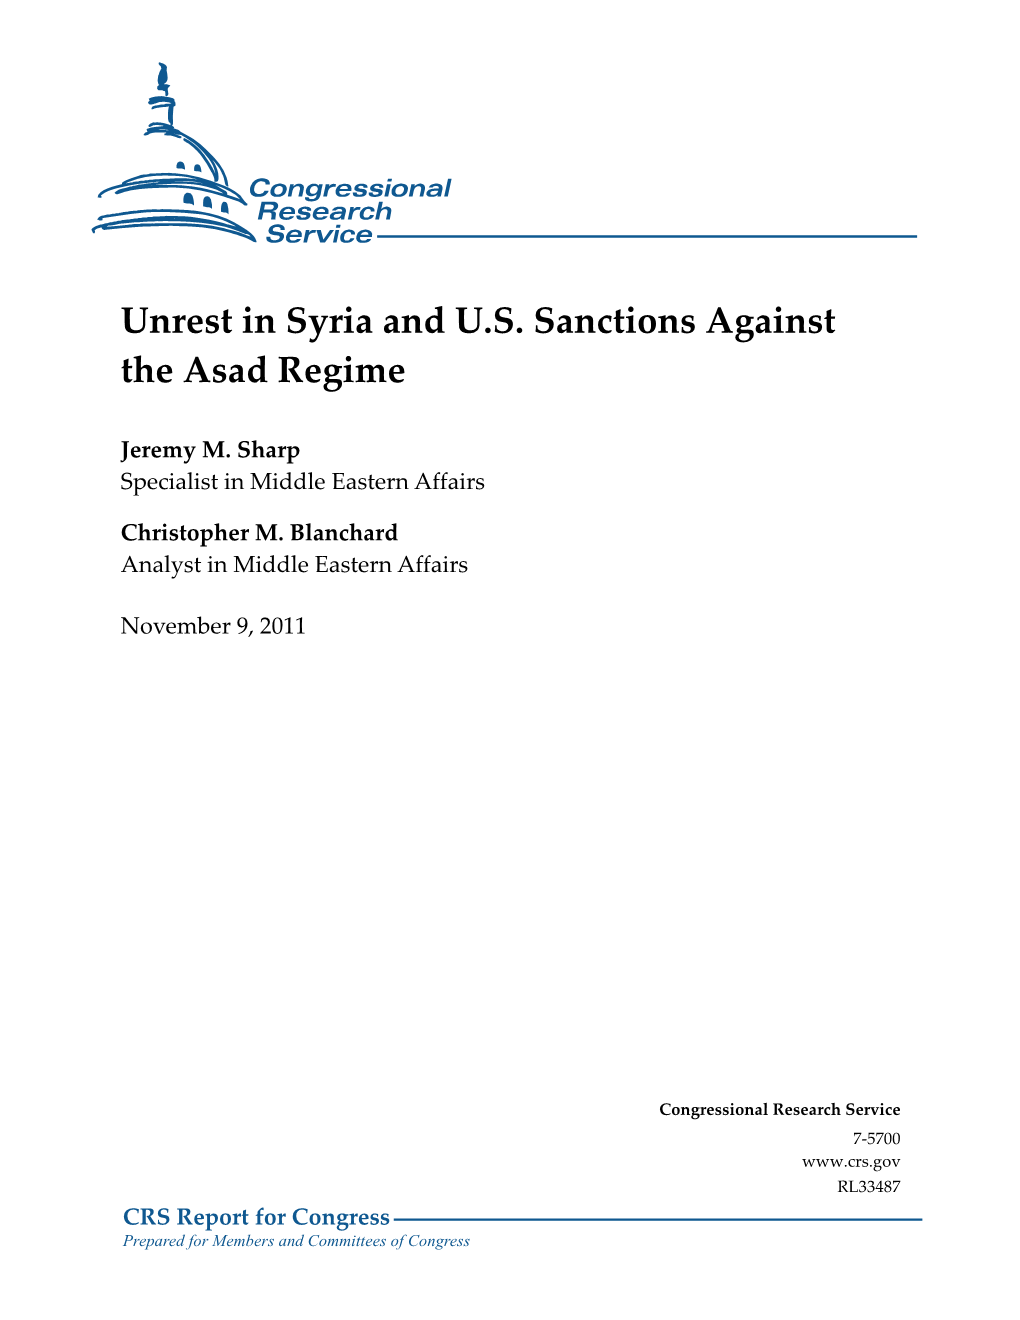 Unrest in Syria and US Sanctions Against the Assad Regime